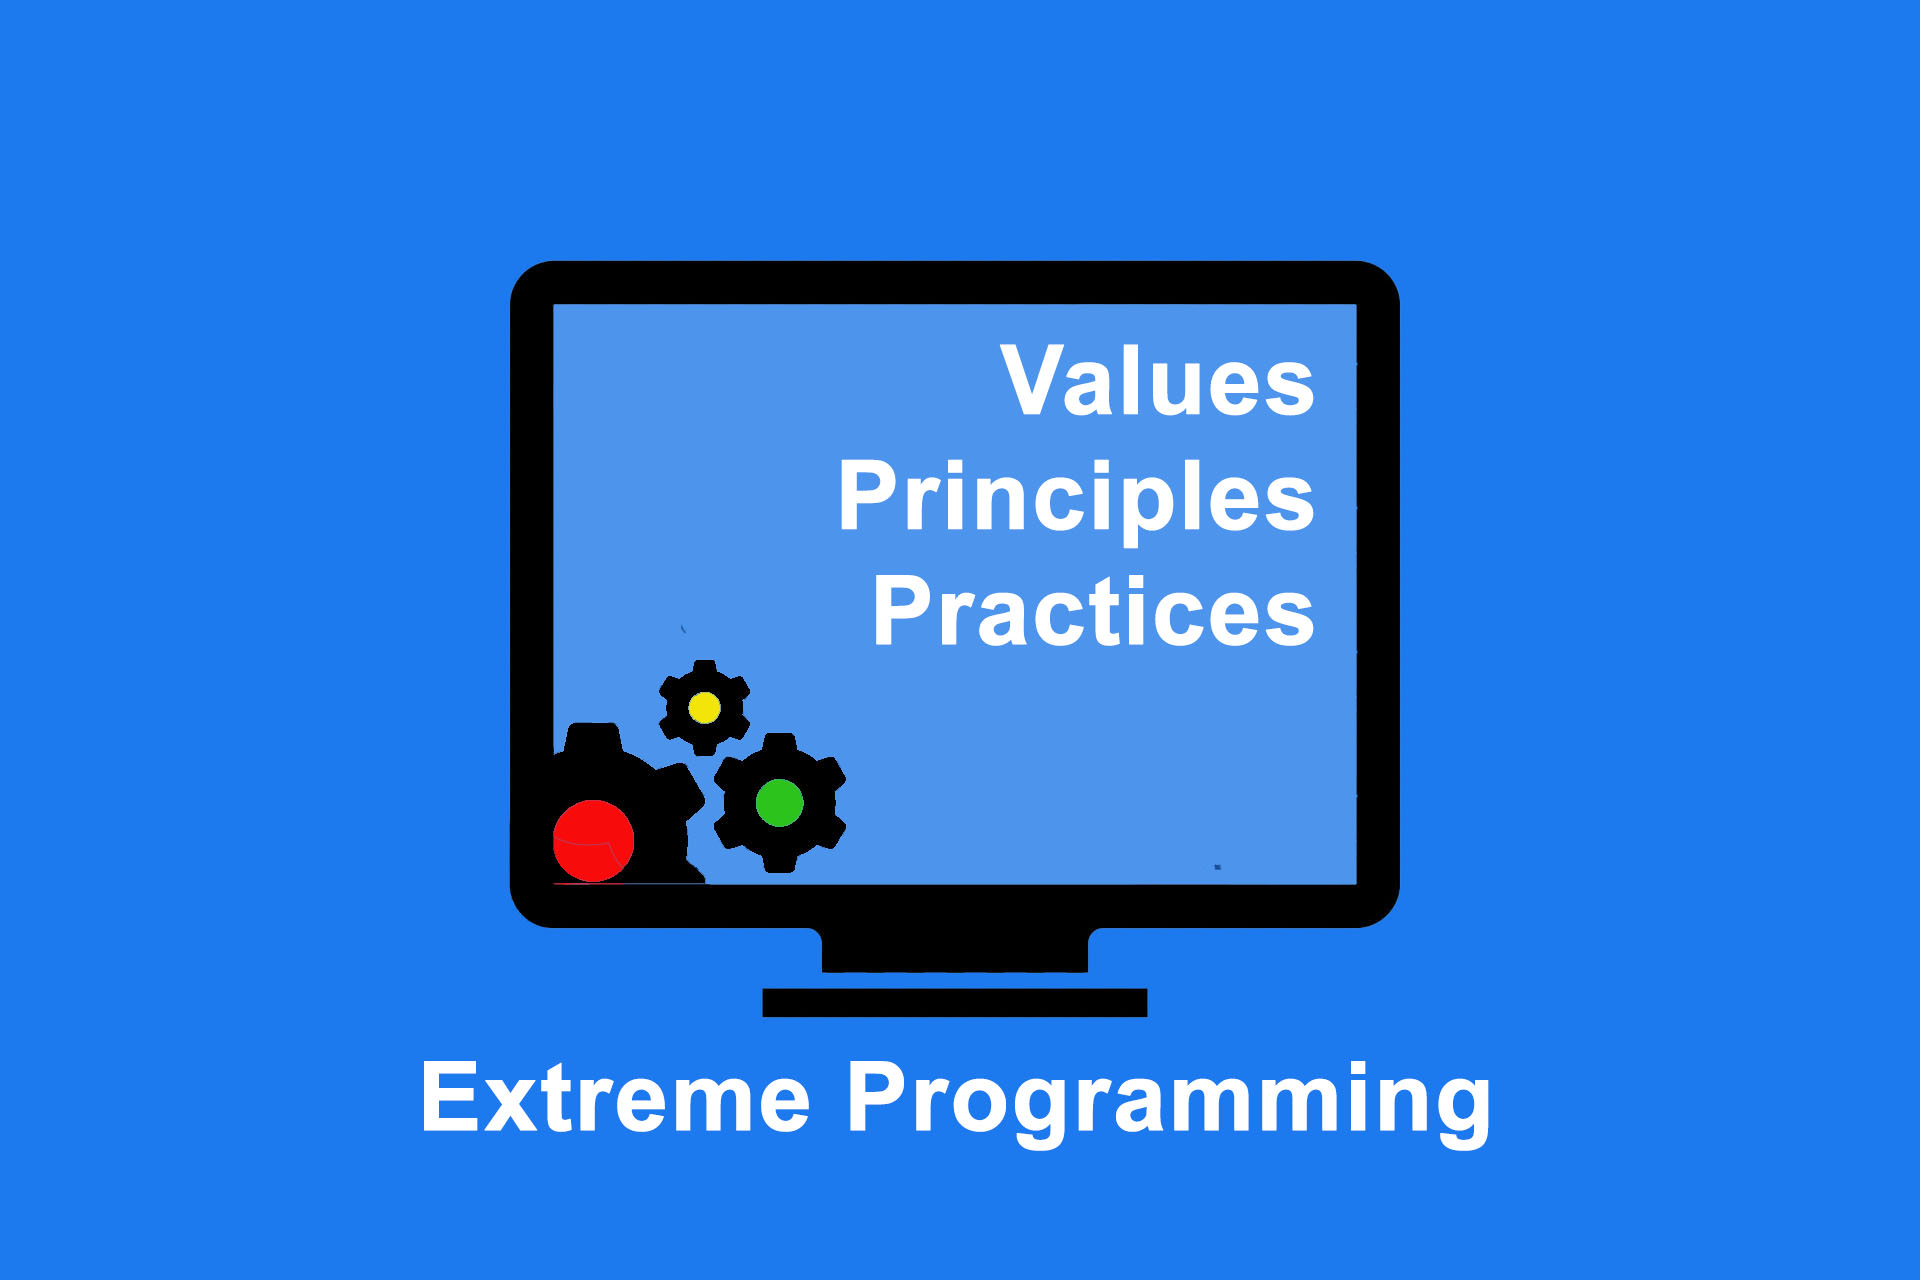 Extreme Programming - a confluence of values, principles and practices